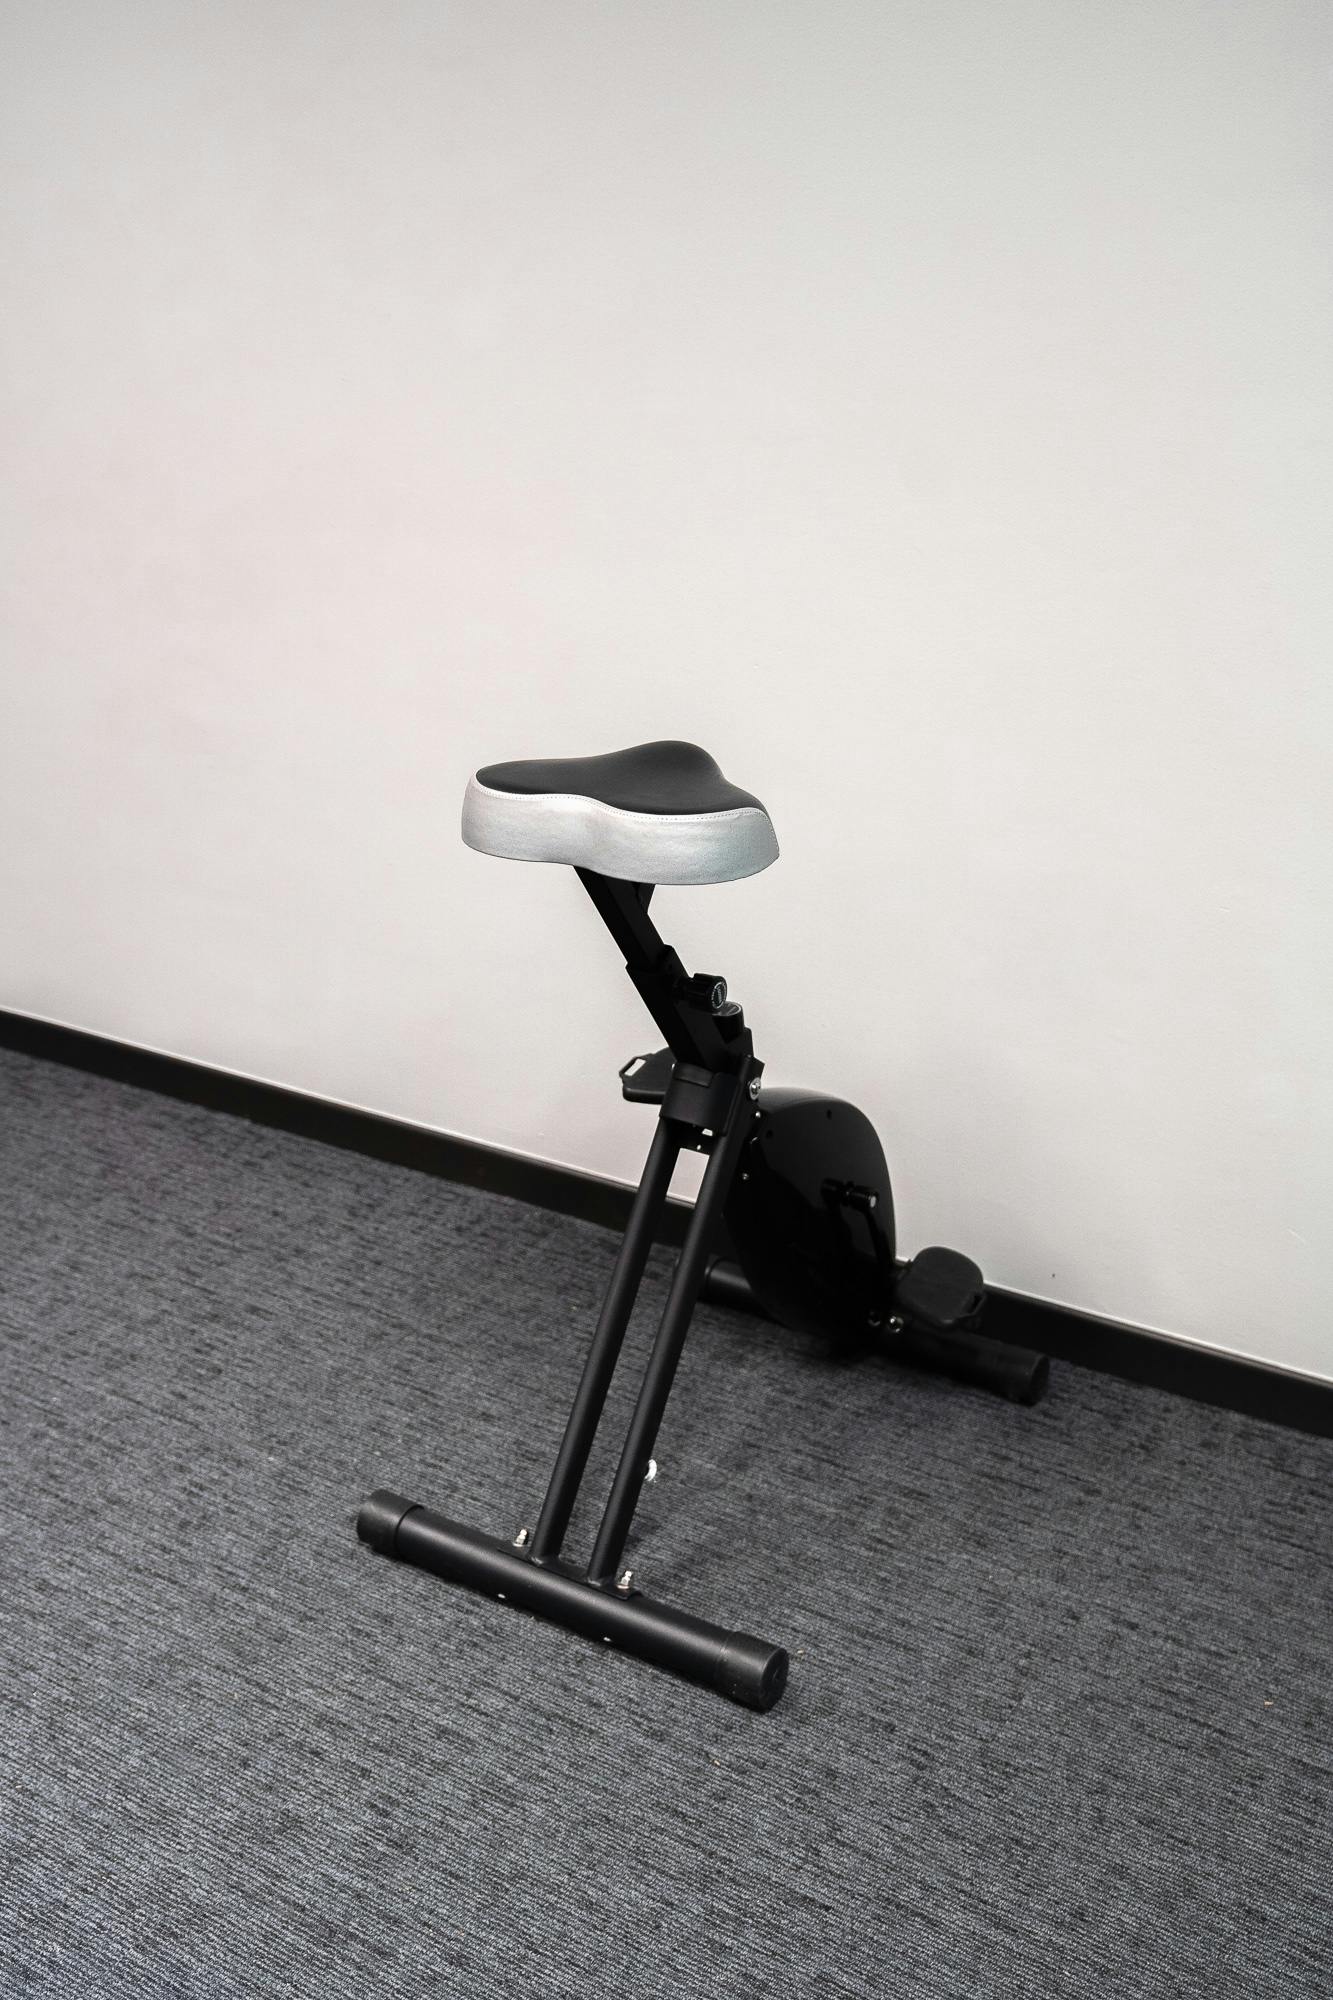 Office bike - DESKBIKE (white) - Second hand quality "Miscellaneous" - Relieve Furniture - 2